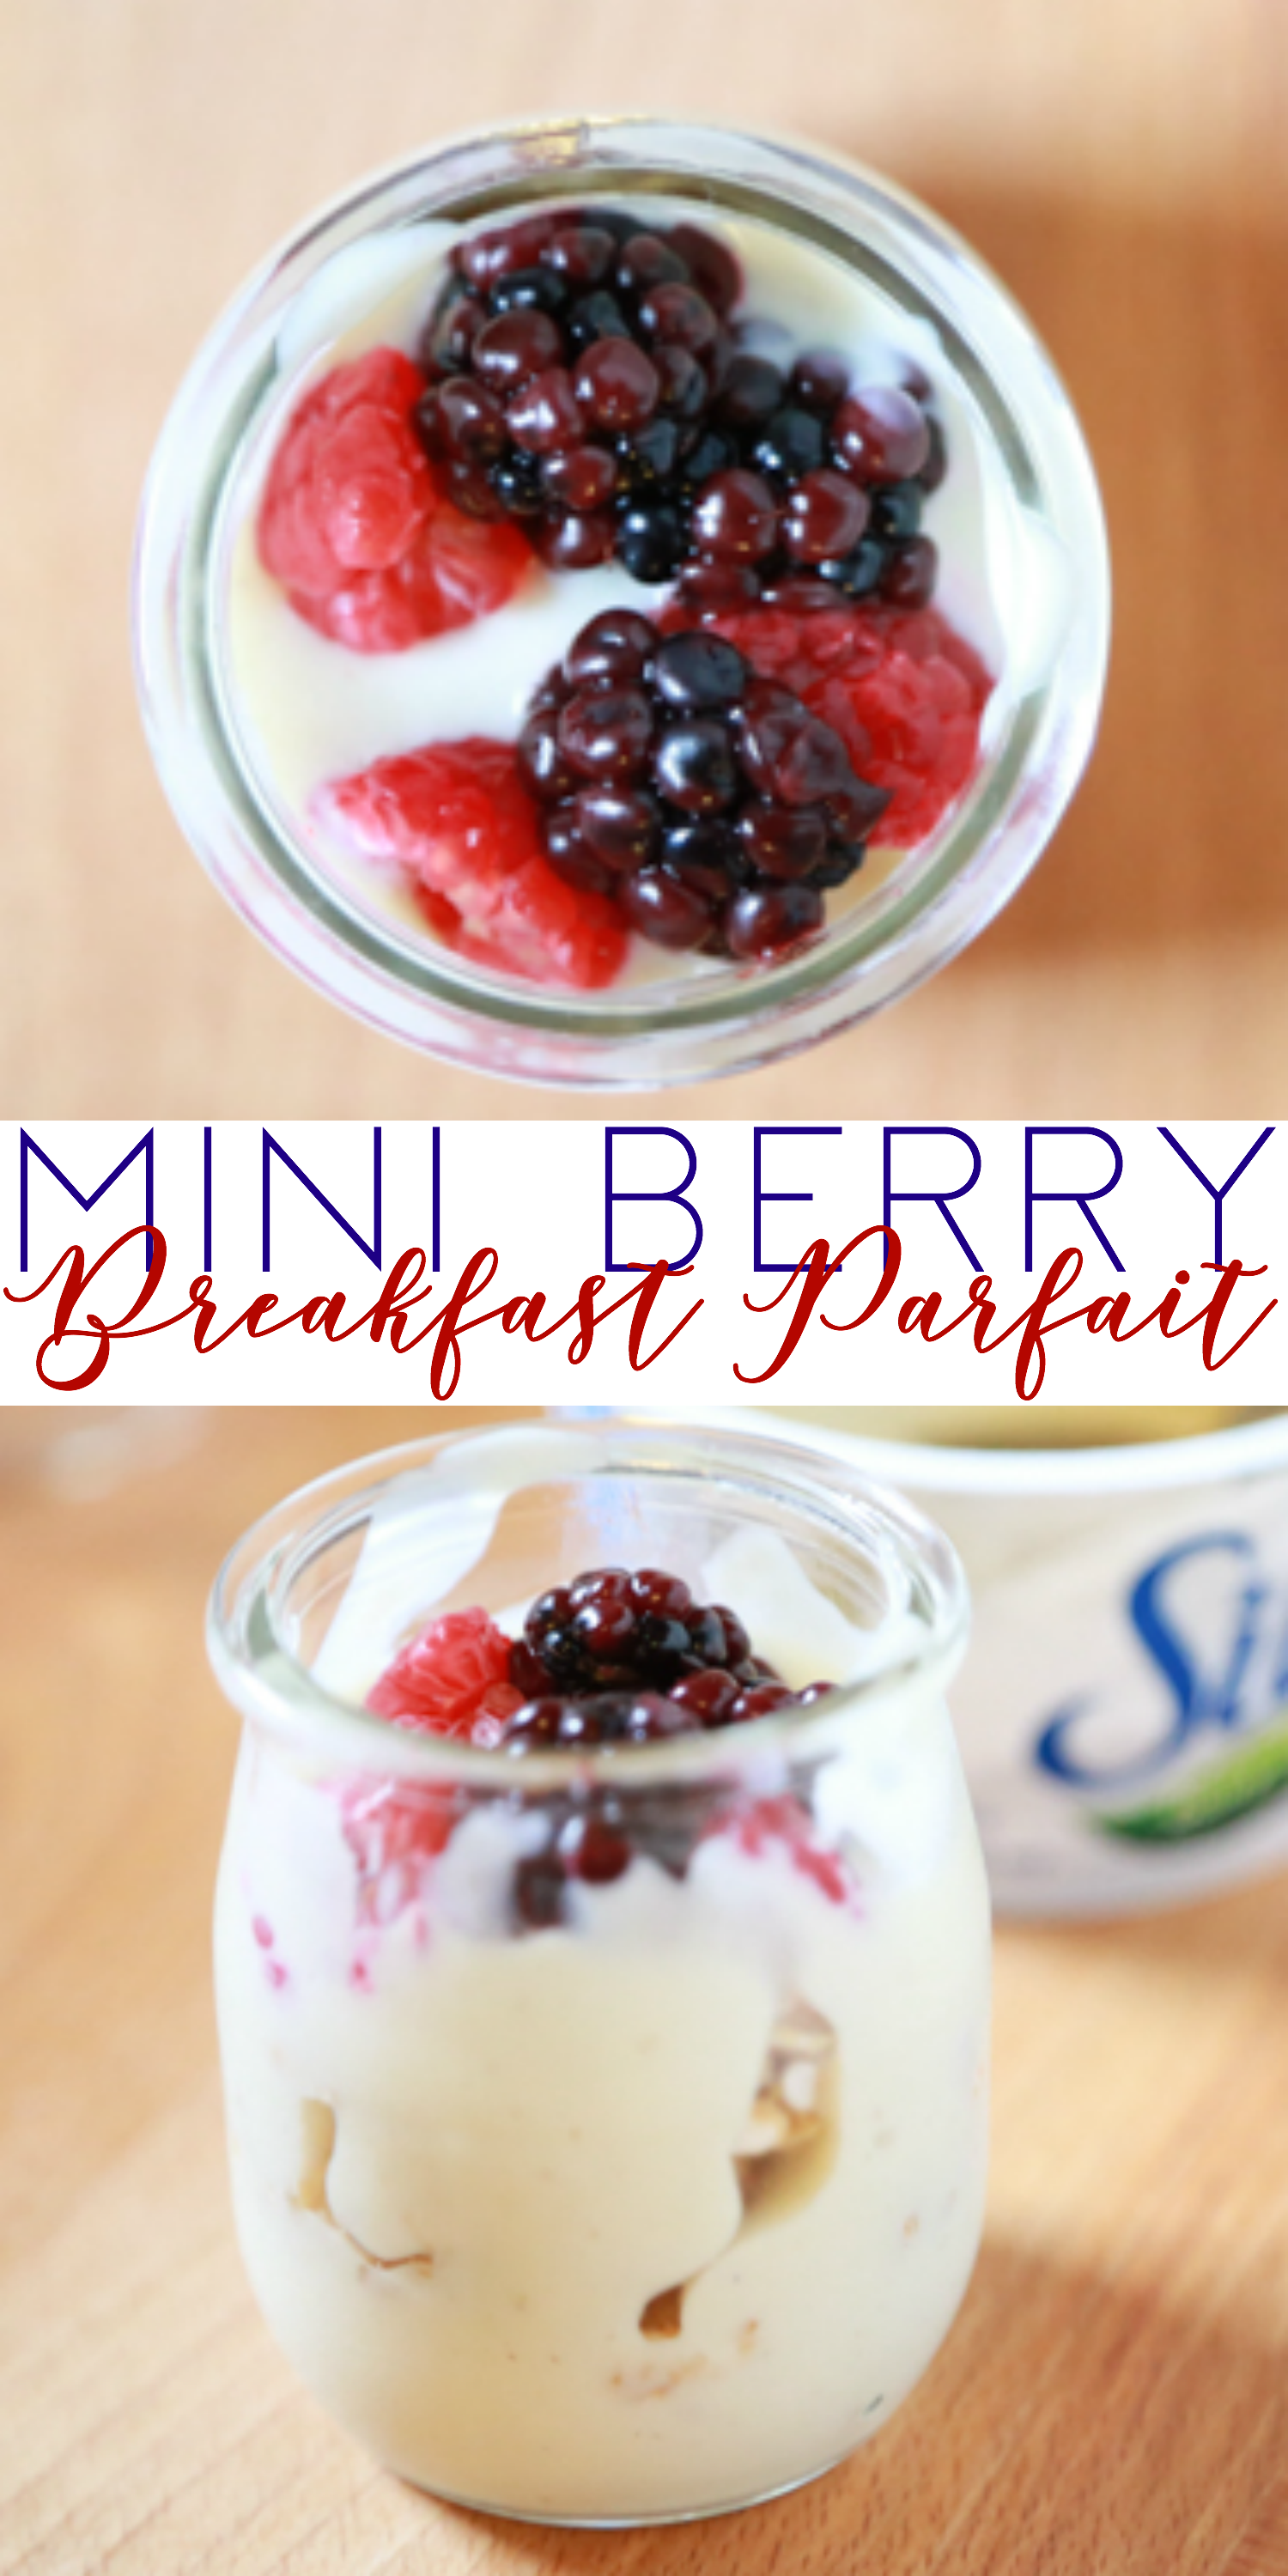 Shop the Natural Foods Department at your local Kroger and get the ingredients to make a delicious Mini Berry Breakfast Parfait.